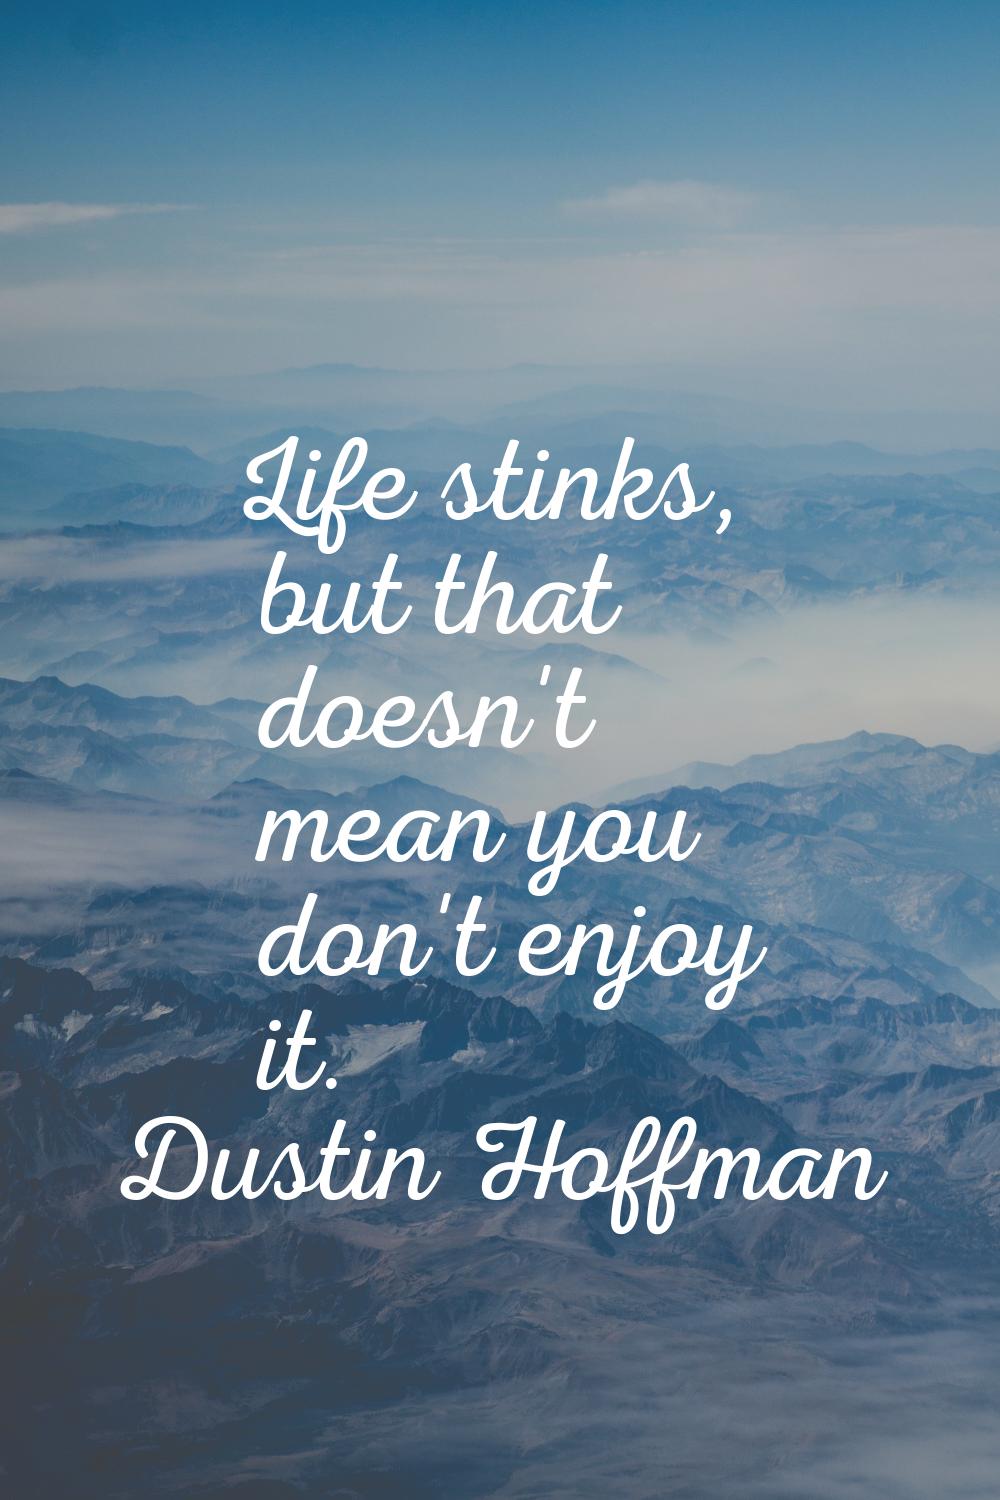 Life stinks, but that doesn't mean you don't enjoy it.